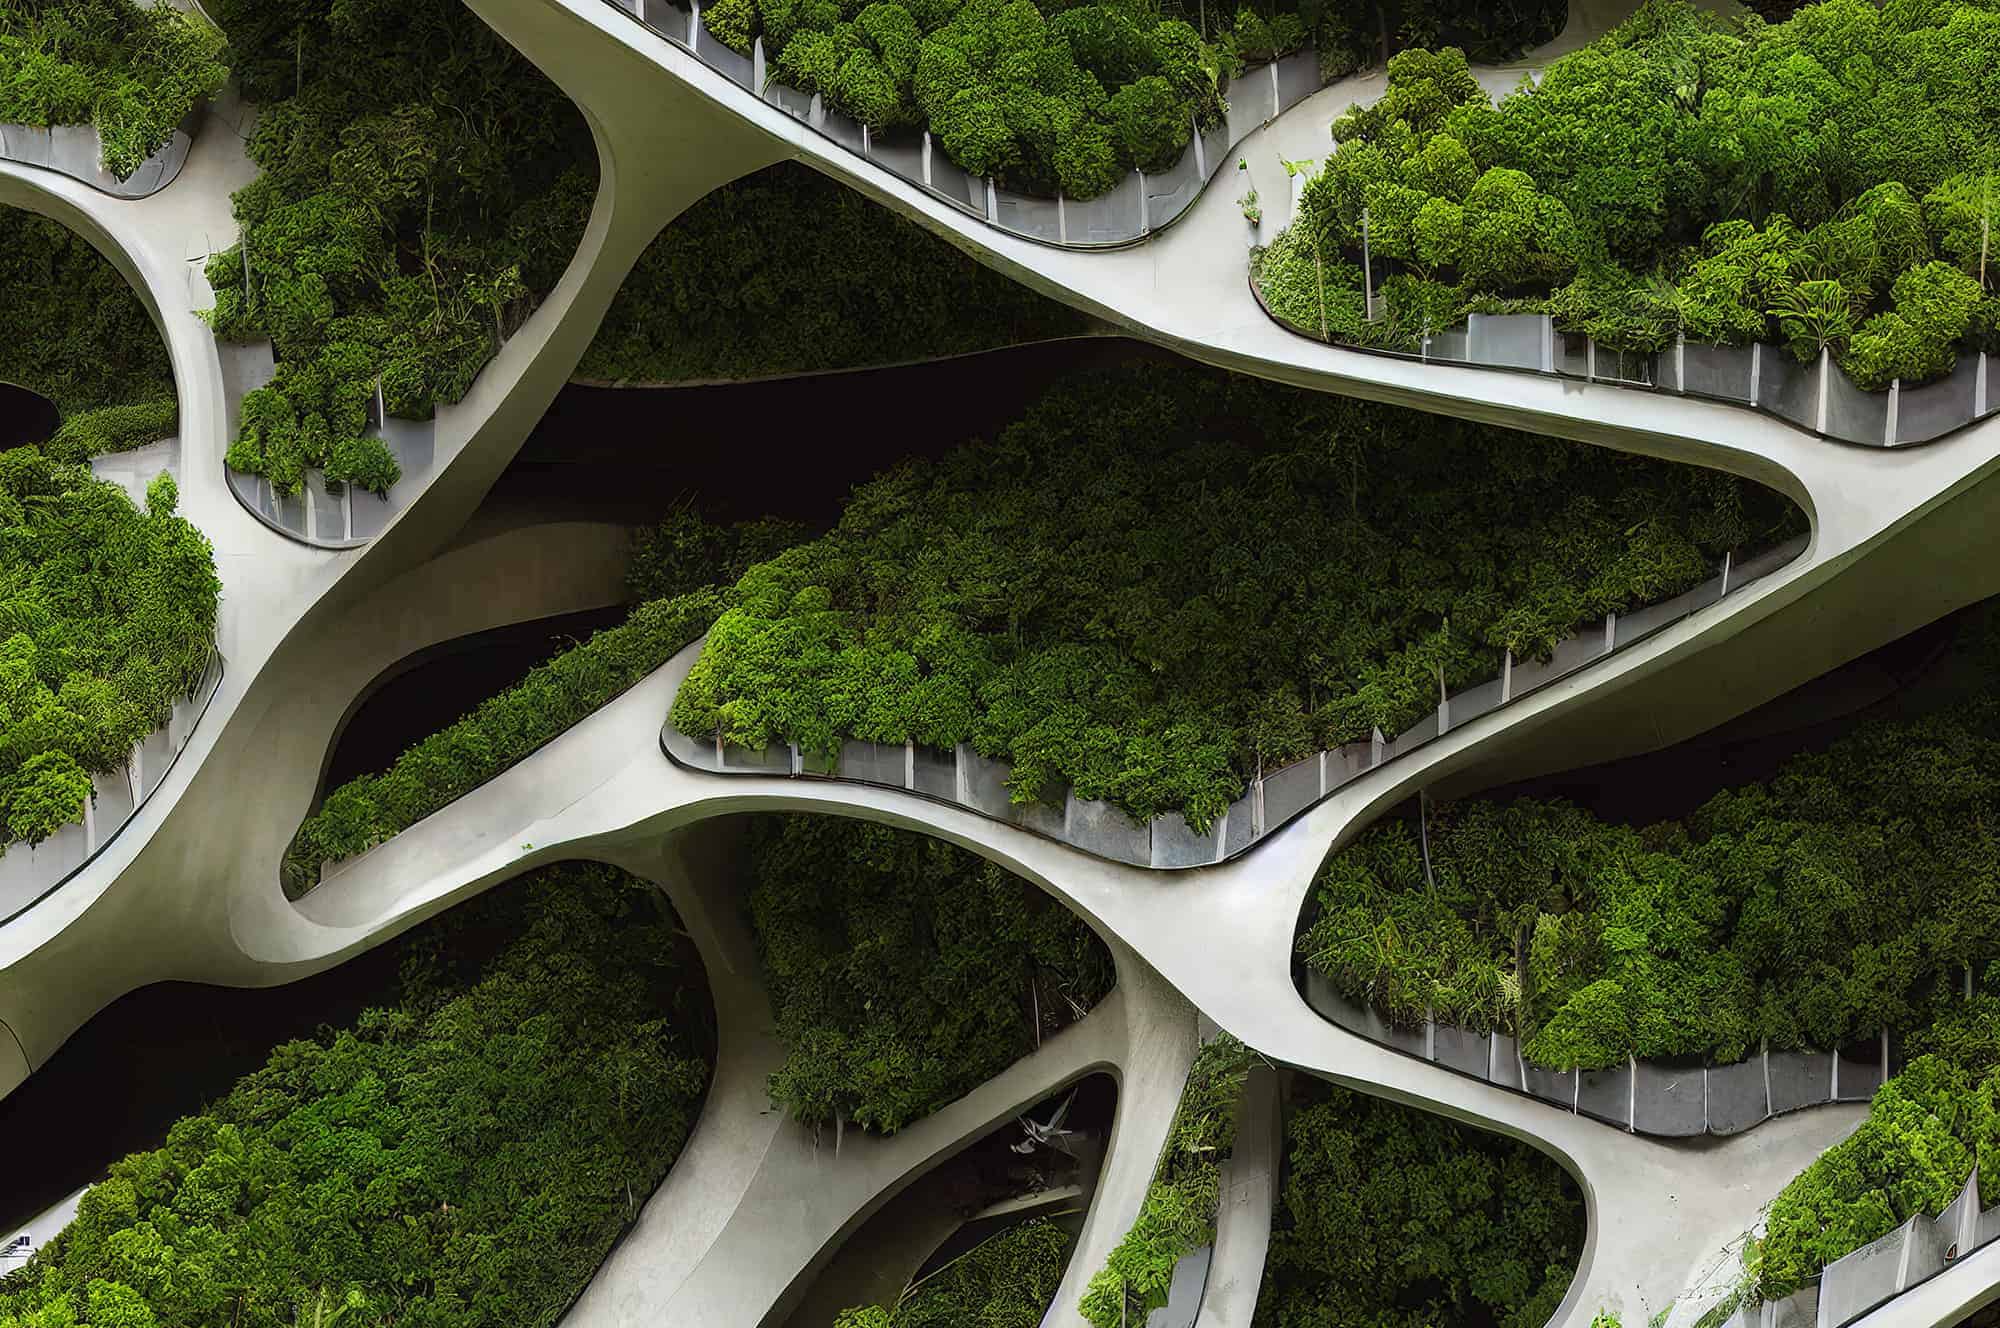 Eco-friendly architecture integrating lush greenery within a multi-level, undulating building structure.